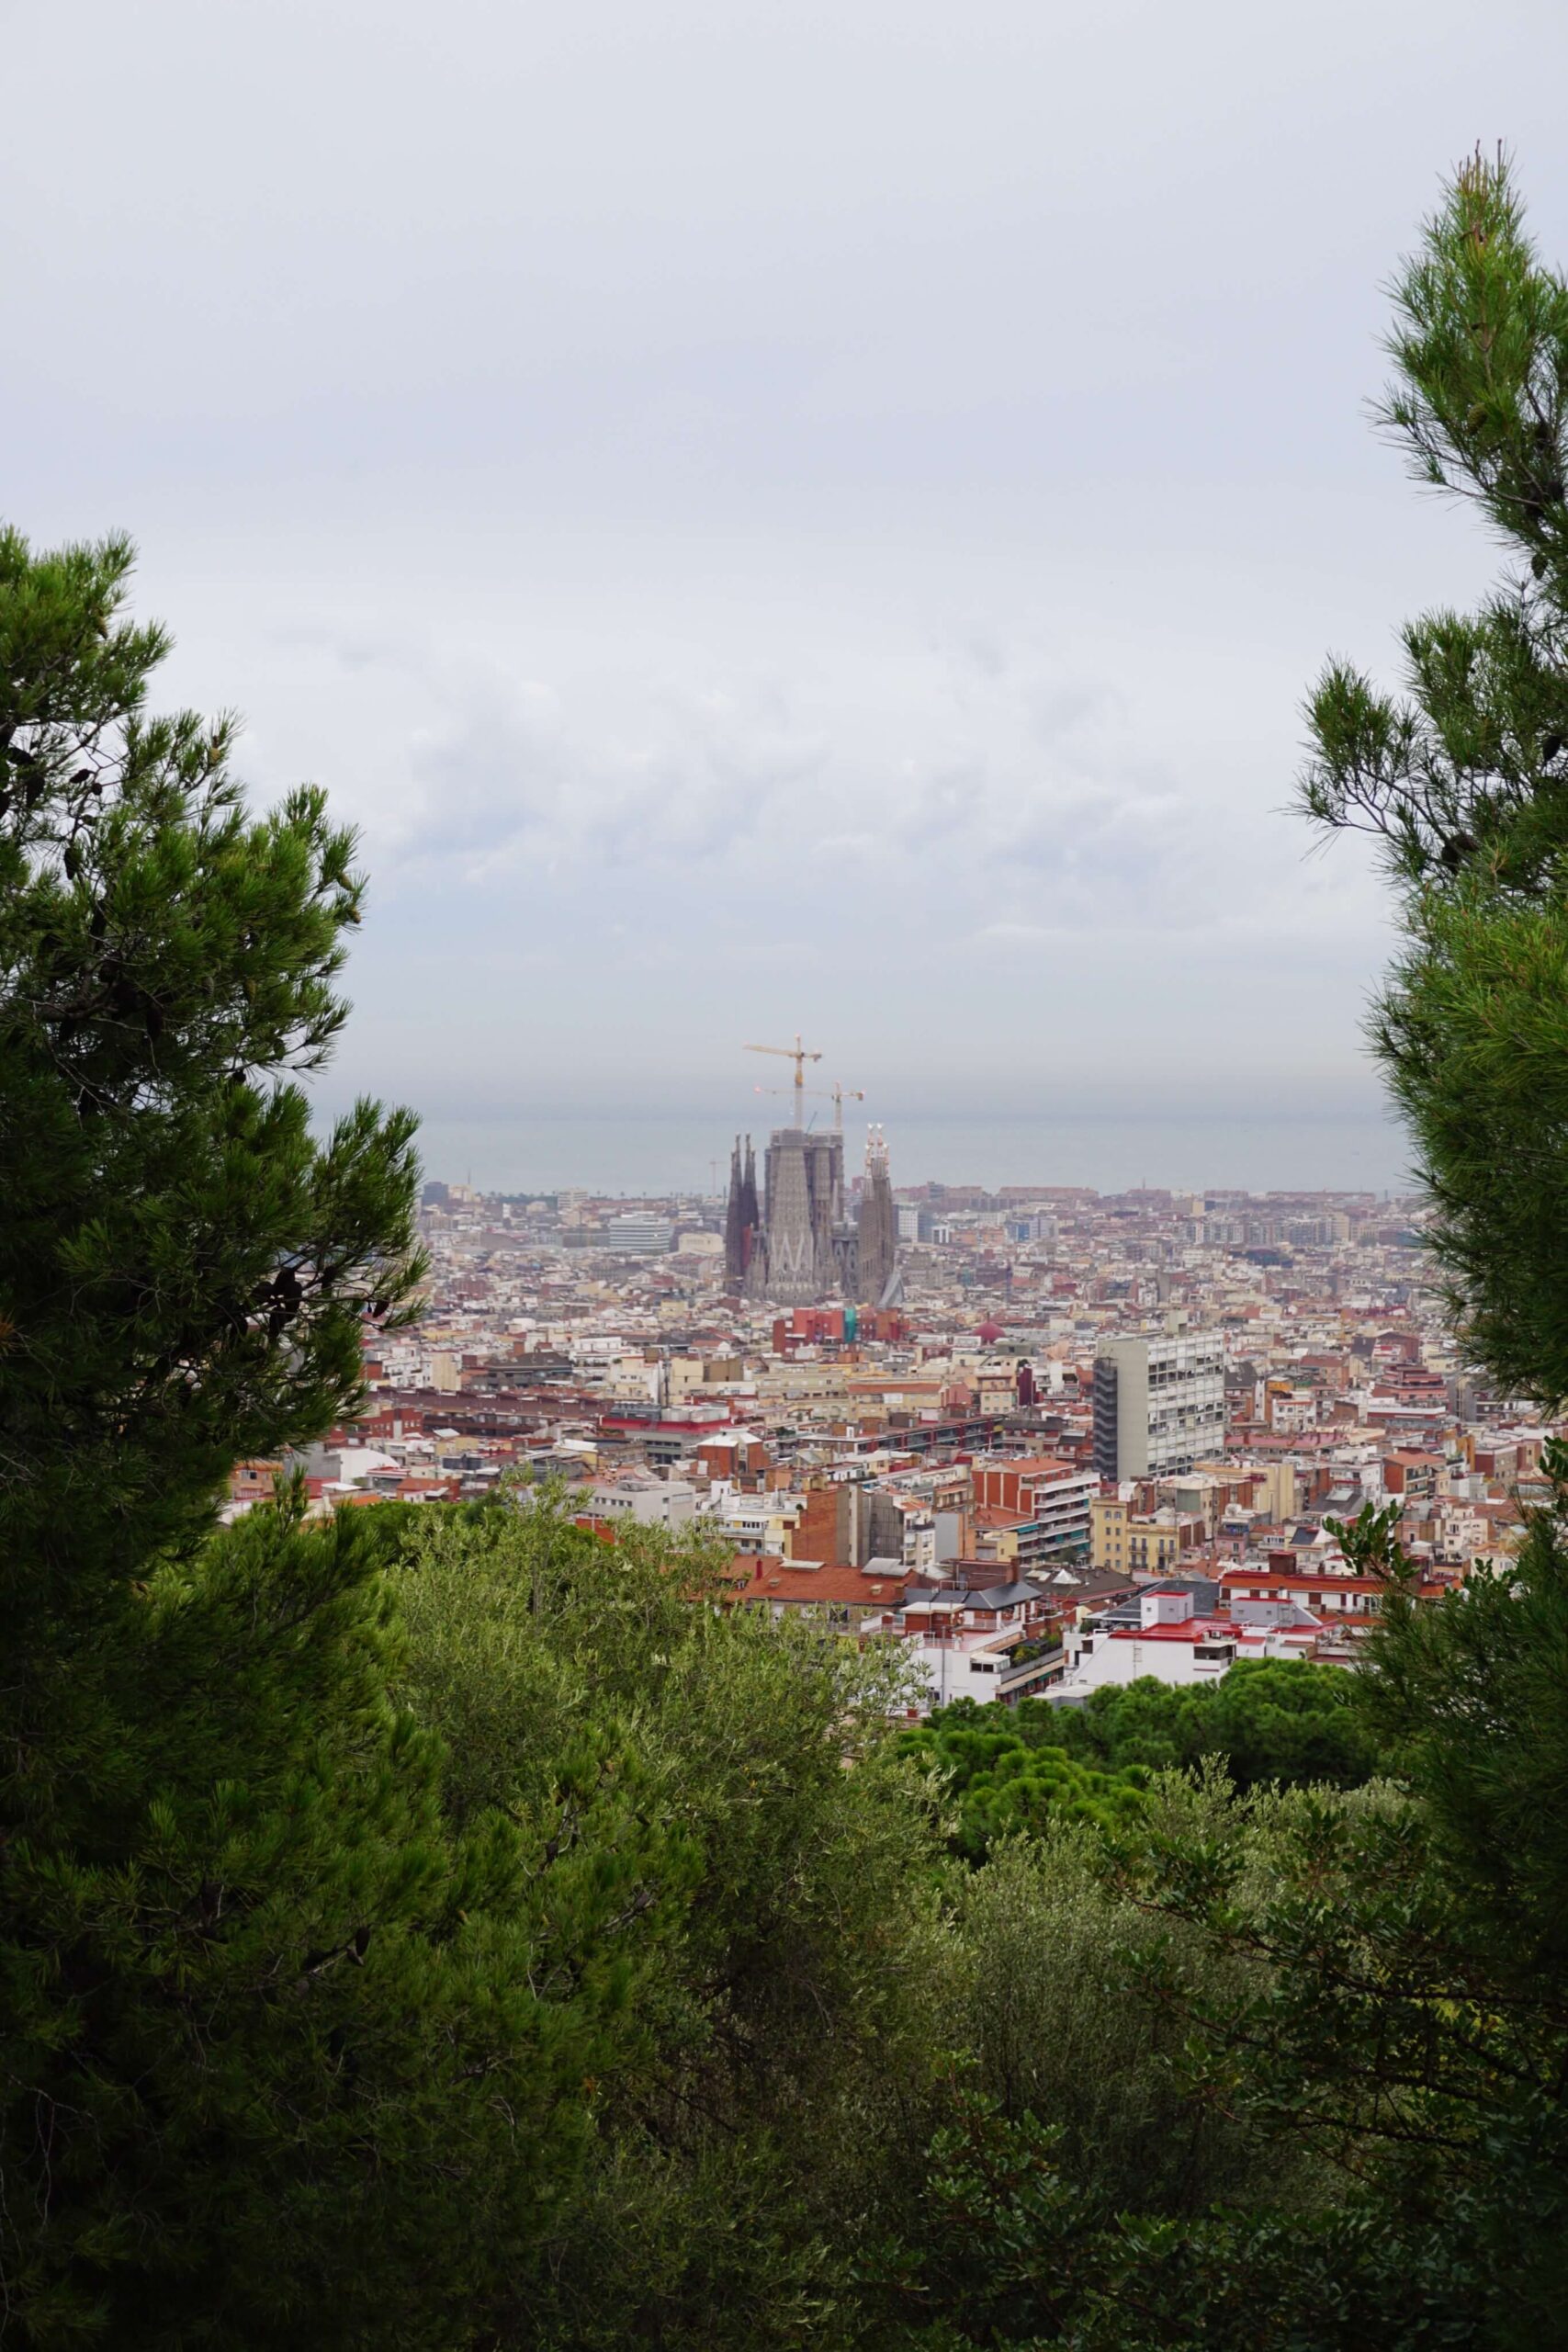 View of the Sagrada Familia from The Three Crosses Hill